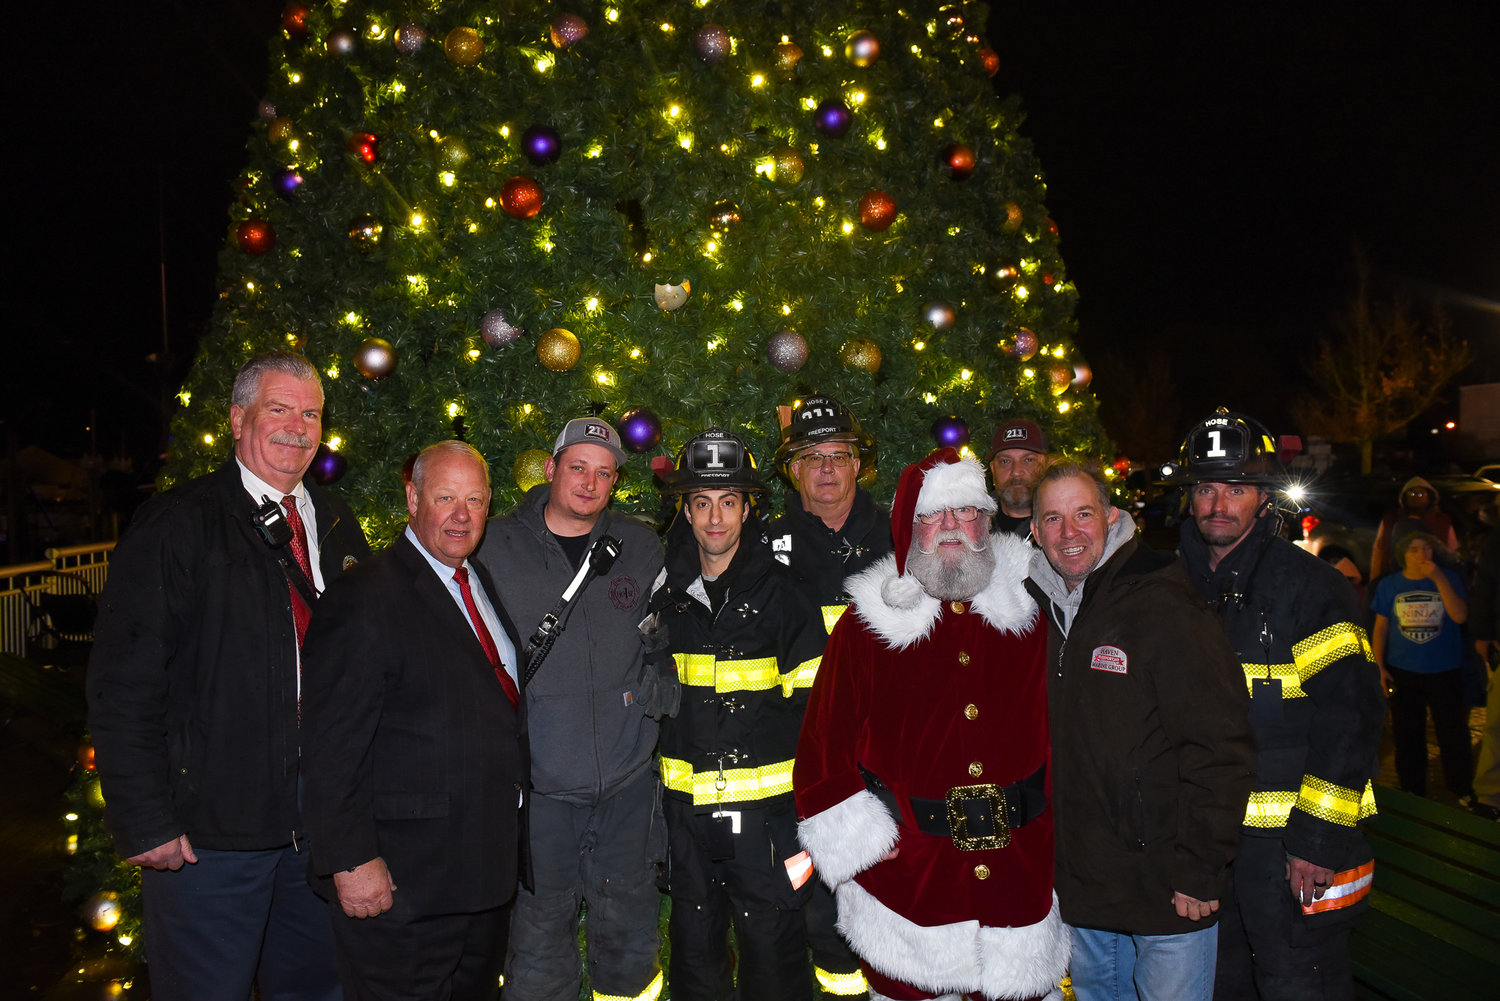 Following the tree lighting, Mayor Robert T. Kennedy, elected officials, and members of the fire department gathered around Santa Claus for photos.